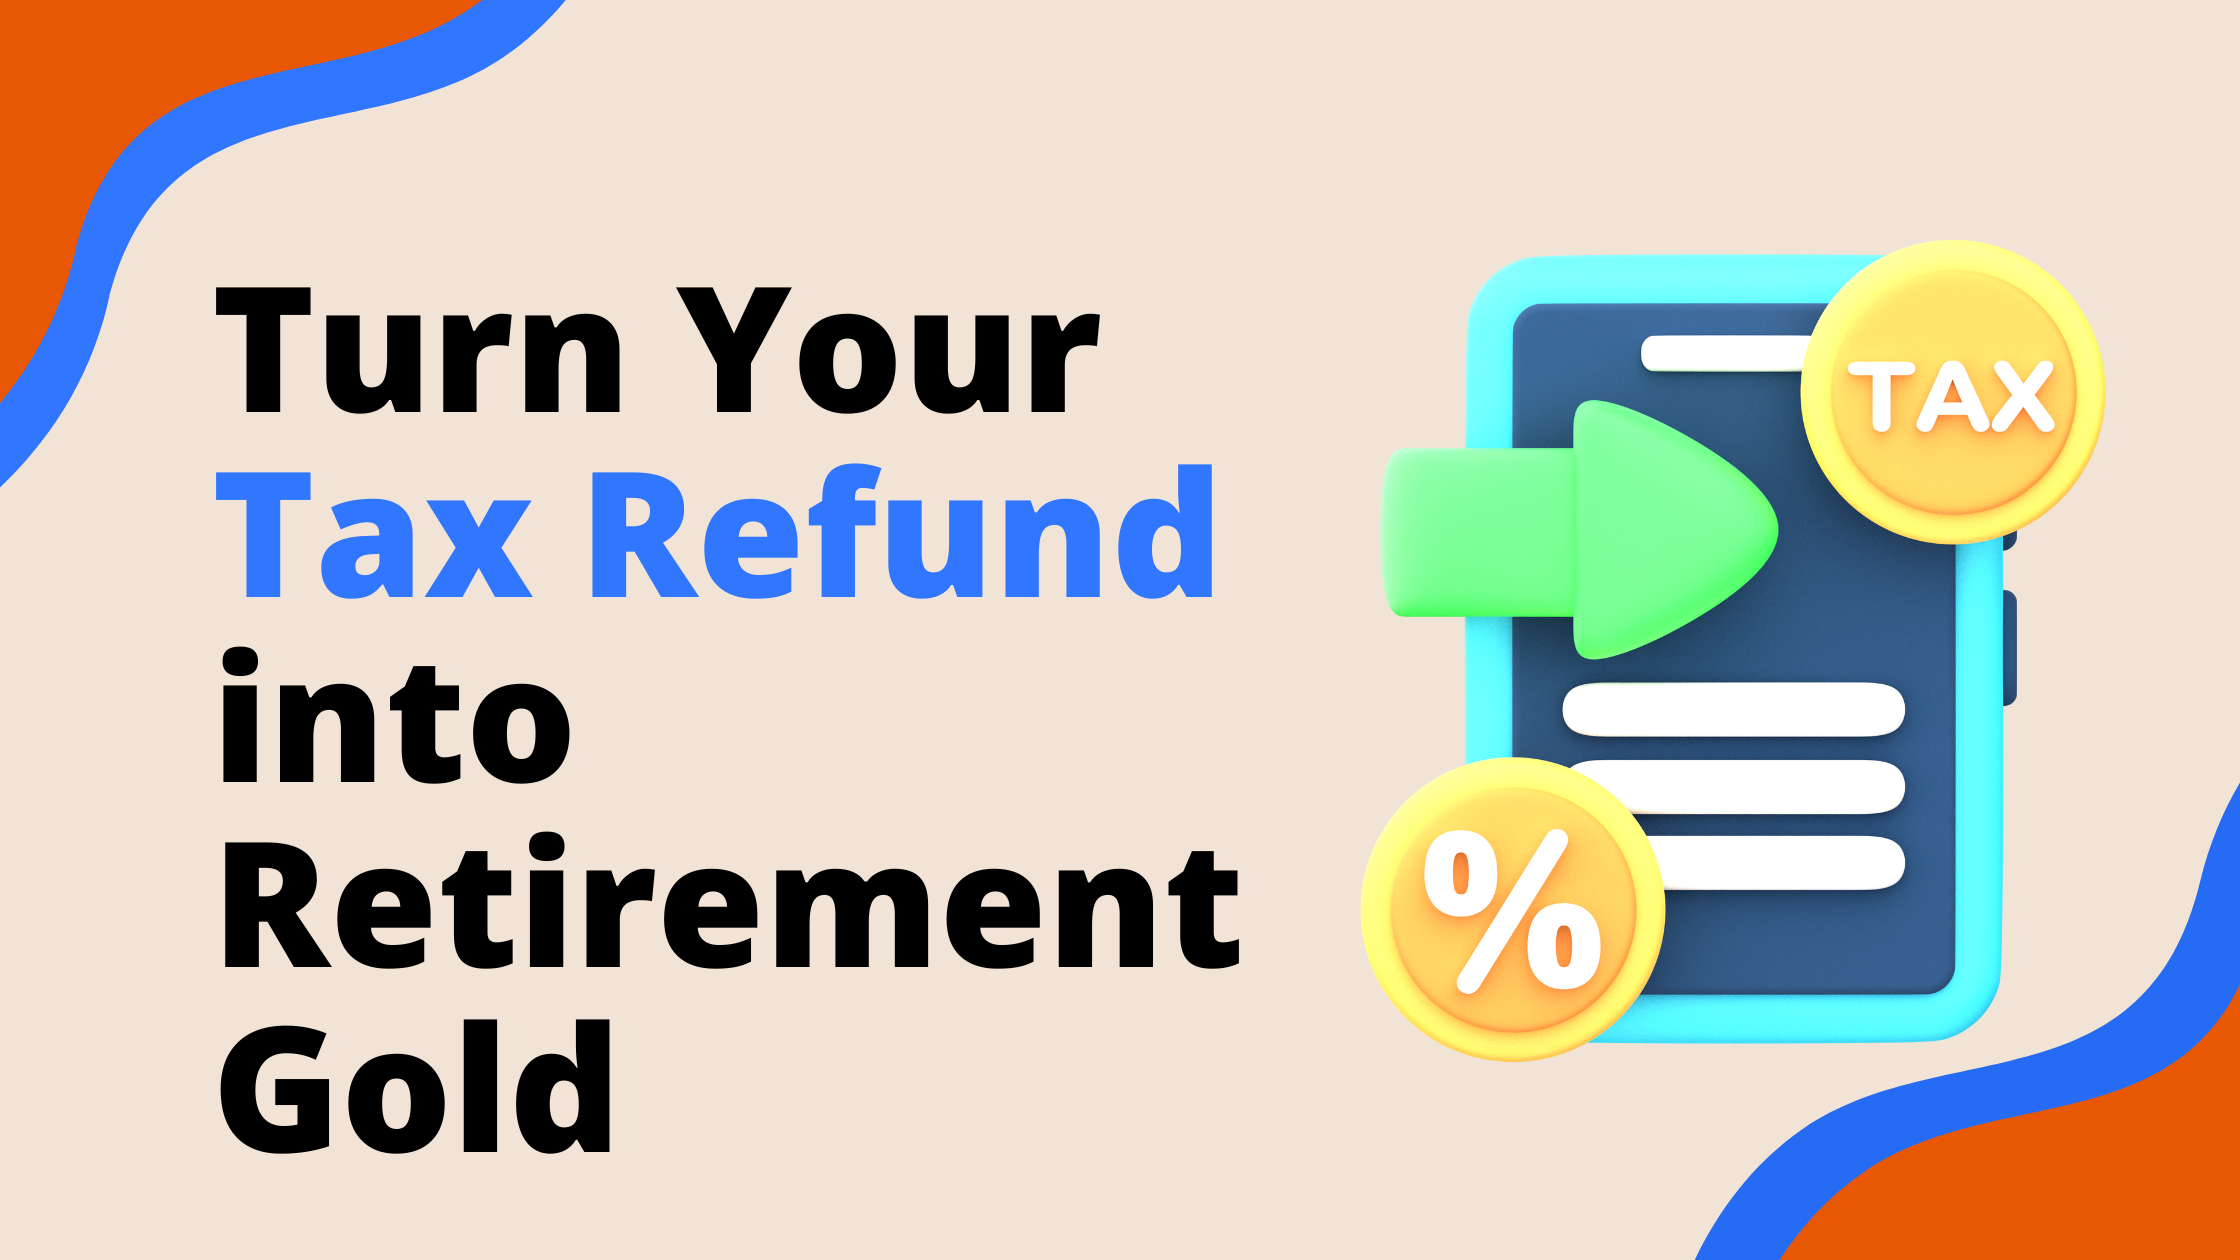 Tax Refund into Retirement Gold